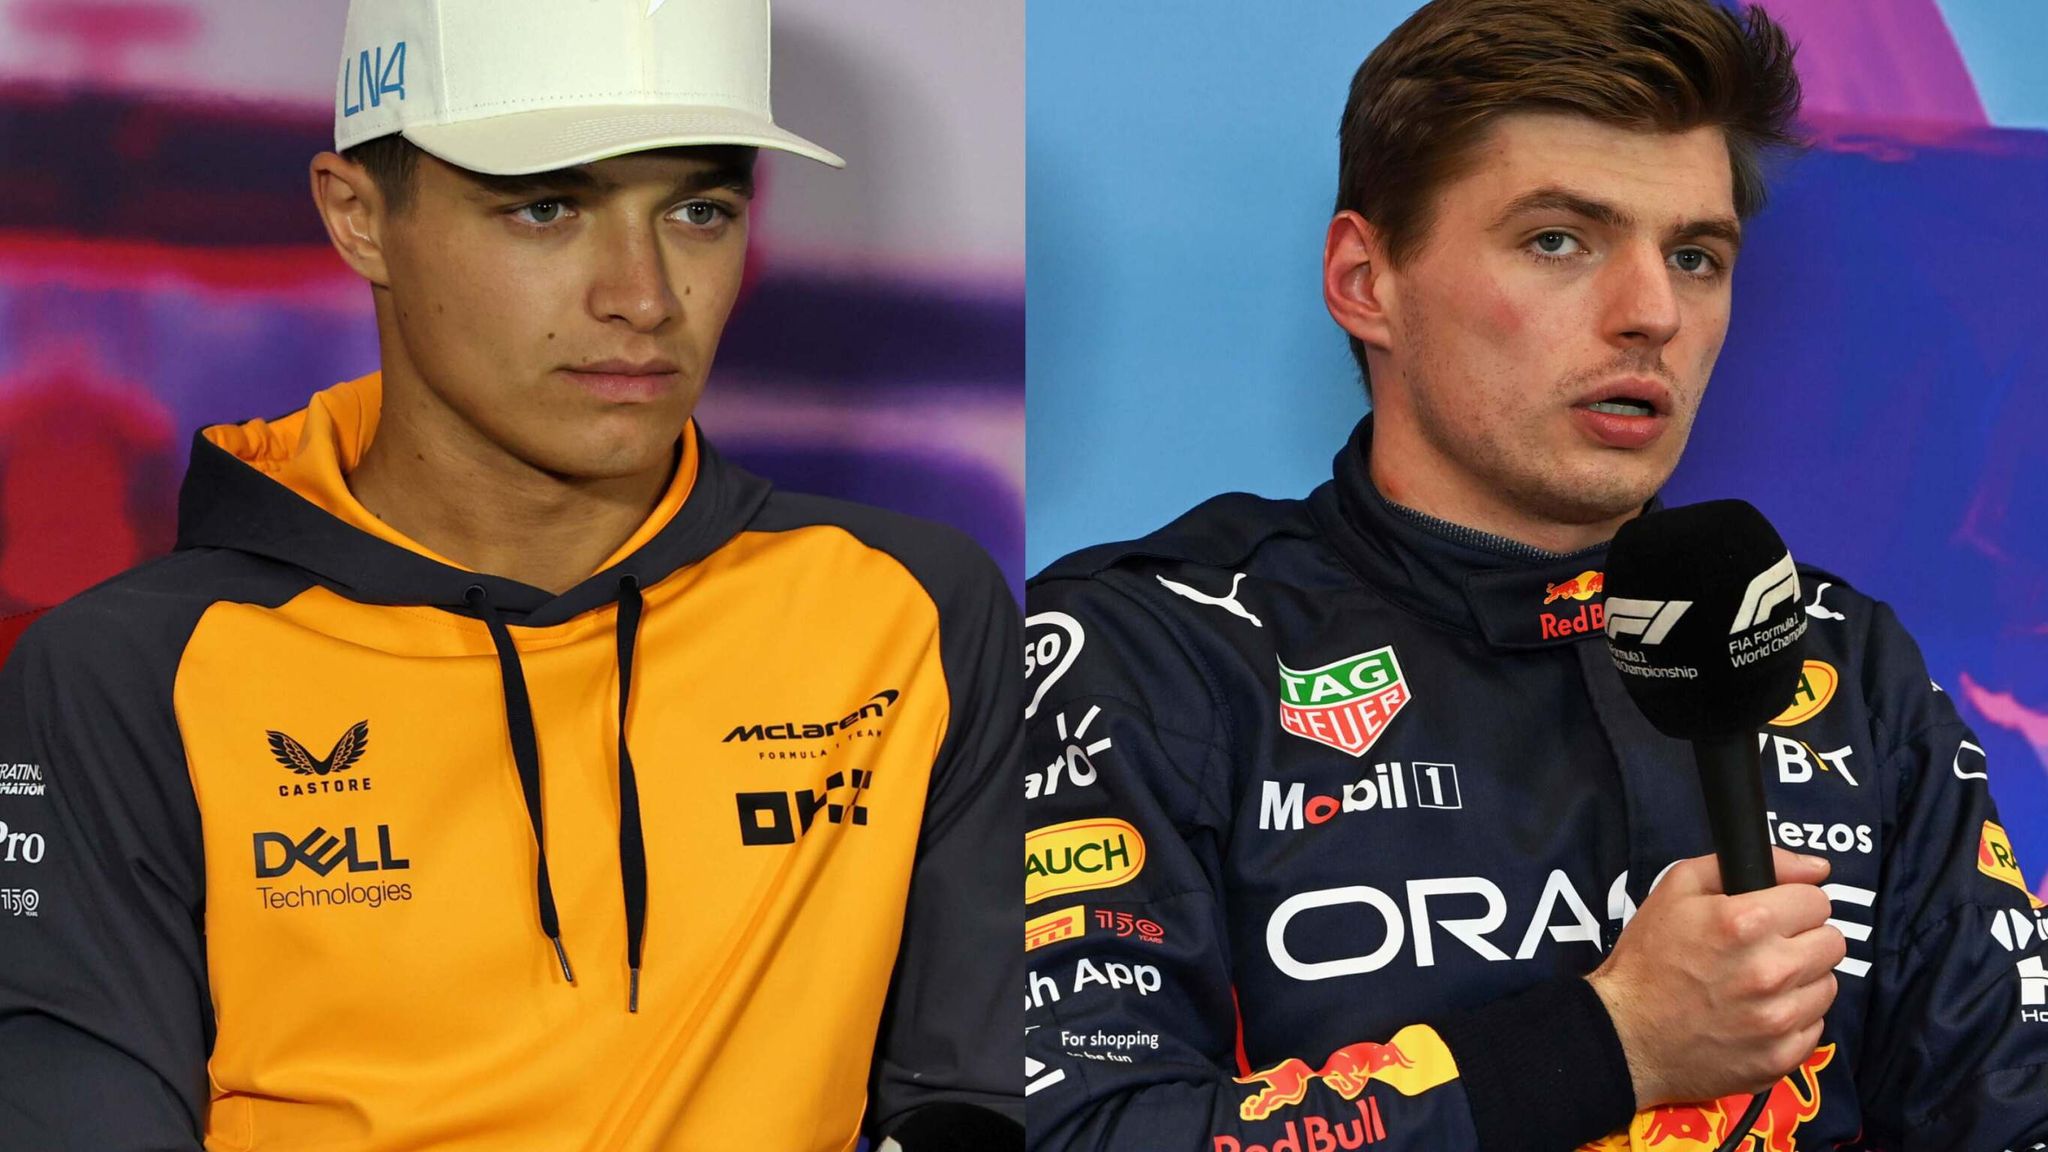 Lando Norris Explains Why He Can't Be a Match to Max Verstappen at Red Bull  - The SportsRush